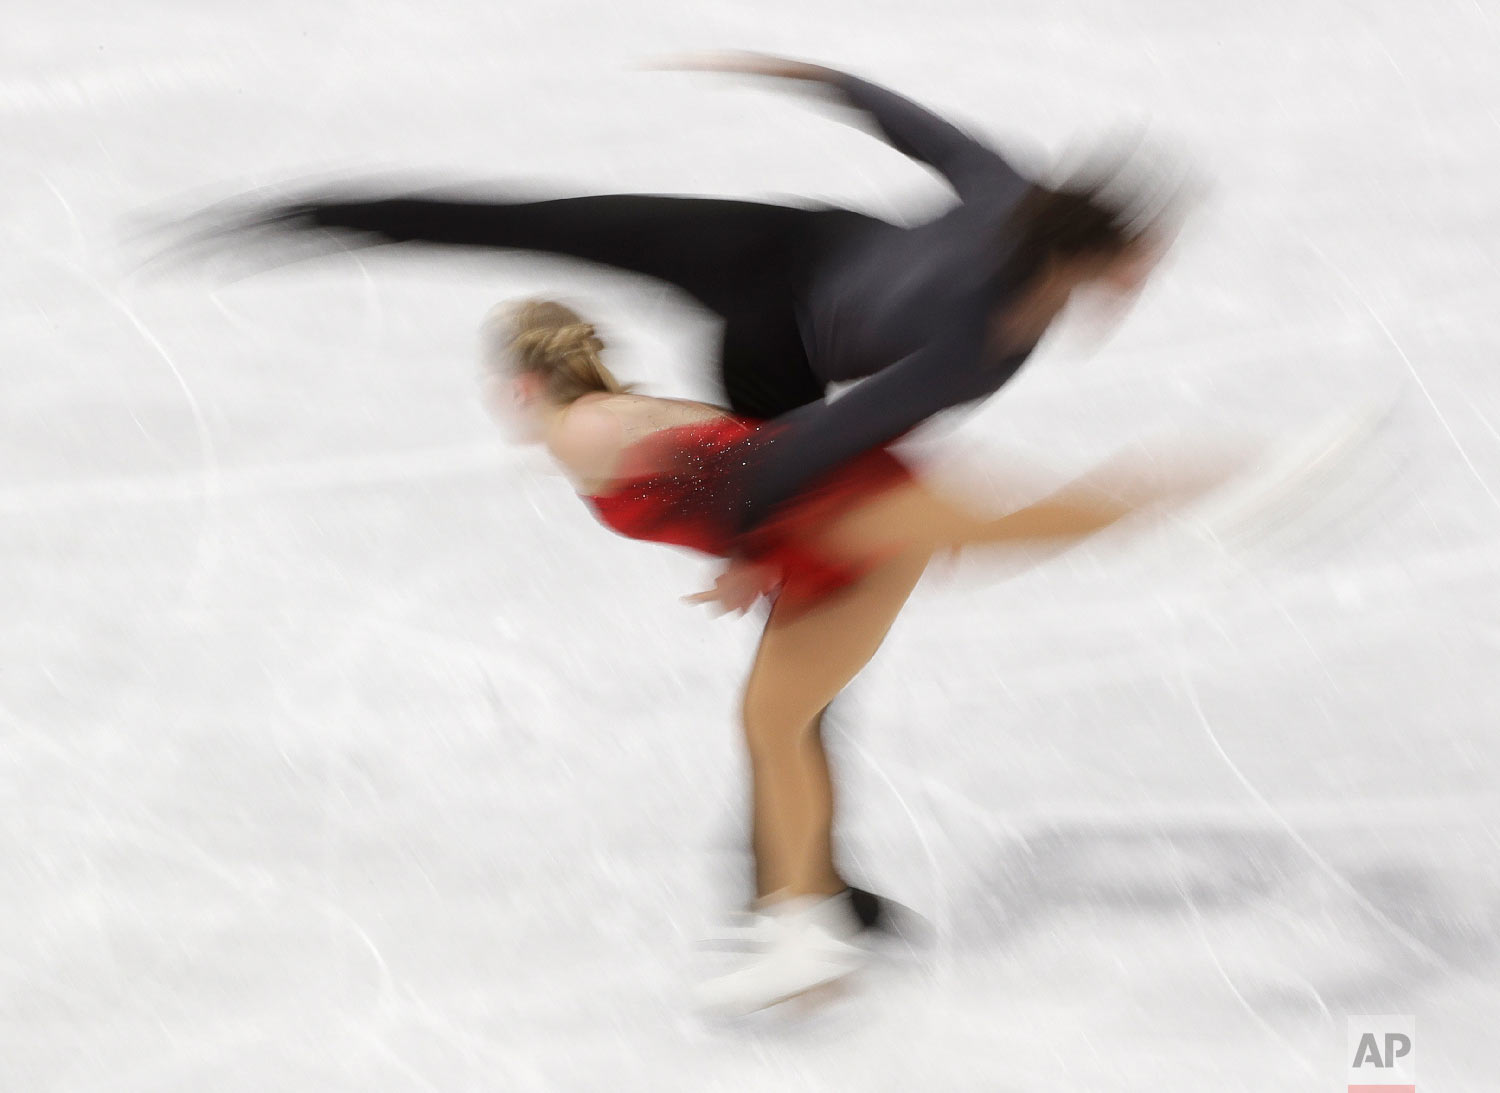  Julianne Seguin and Charlie Bilodeau, of Canada, perform in the pairs free skate figure skating final in the Gangneung Ice Arena at the 2018 Winter Olympics in Gangneung, South Korea, Thursday, Feb. 15, 2018. (AP Photo/David J. Phillip) 